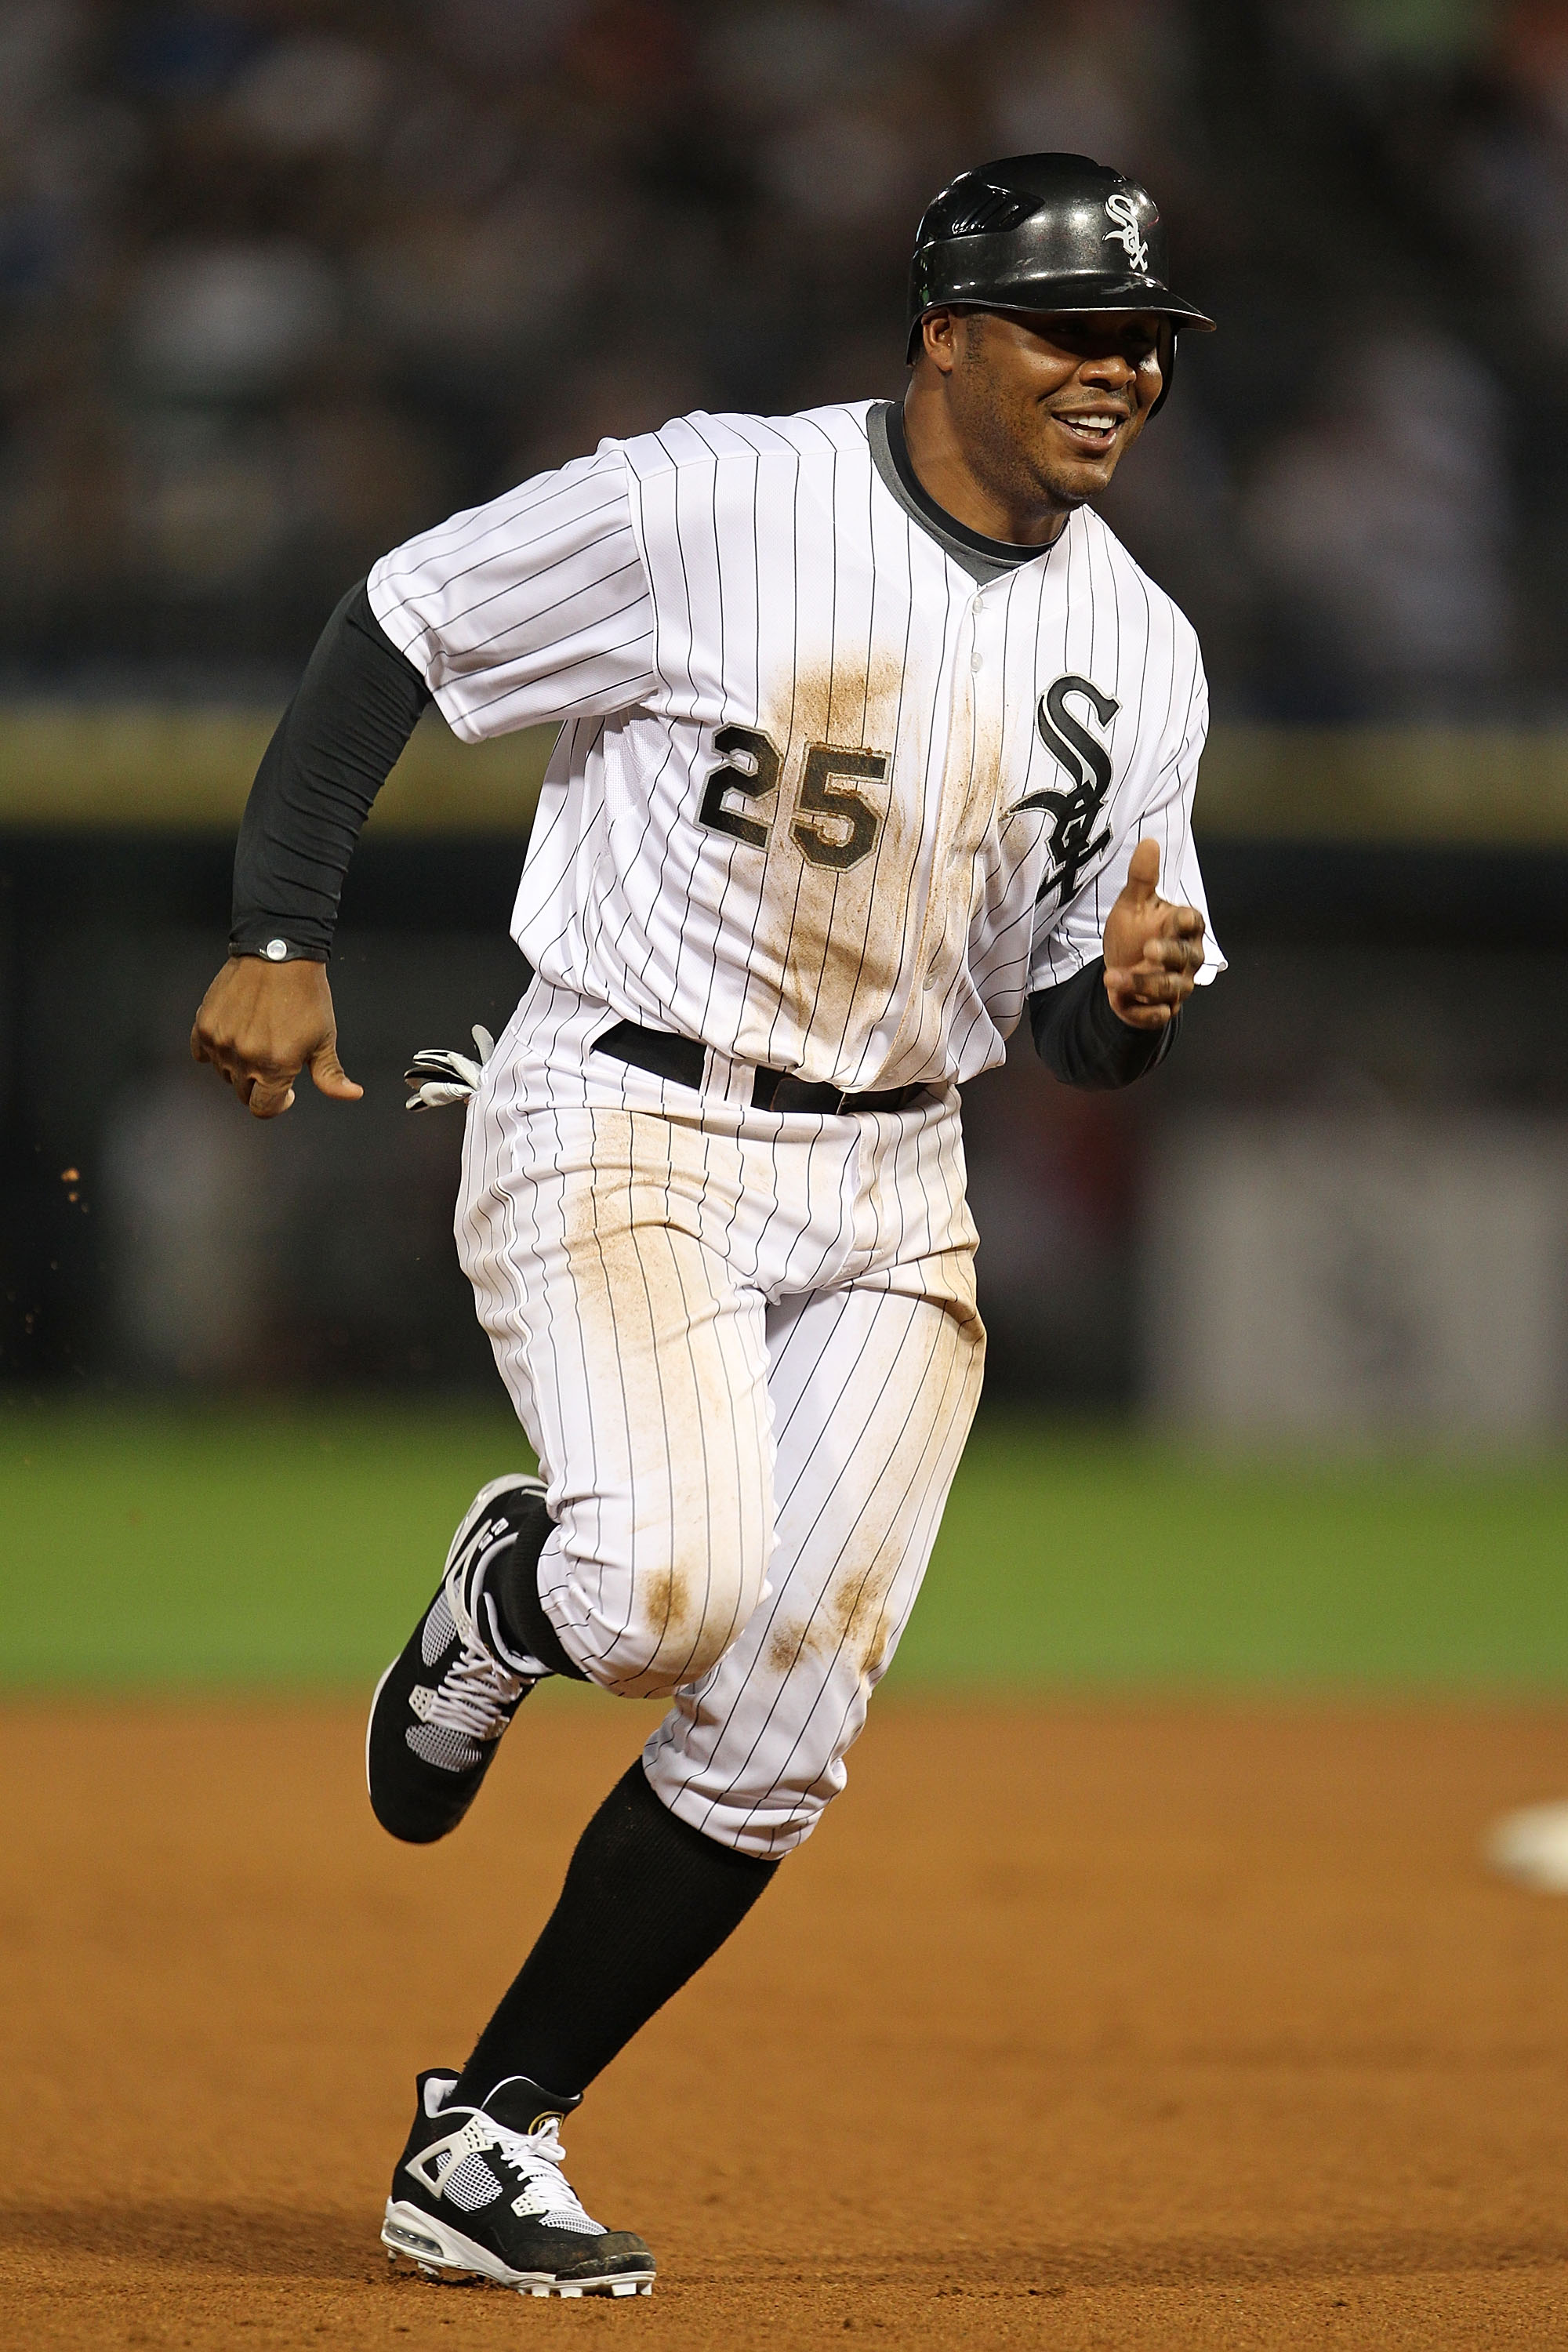 CHICAGO - JULY 26: Andruw Jones #25 of the Chicago White Sox smiles as he runs the bases against the Seattle Mariners at U.S. Cellular Field on July 26, 2010 in Chicago, Illinois. The White Sox defeated the Mariners 6-1. (Photo by Jonathan Daniel/Getty Im